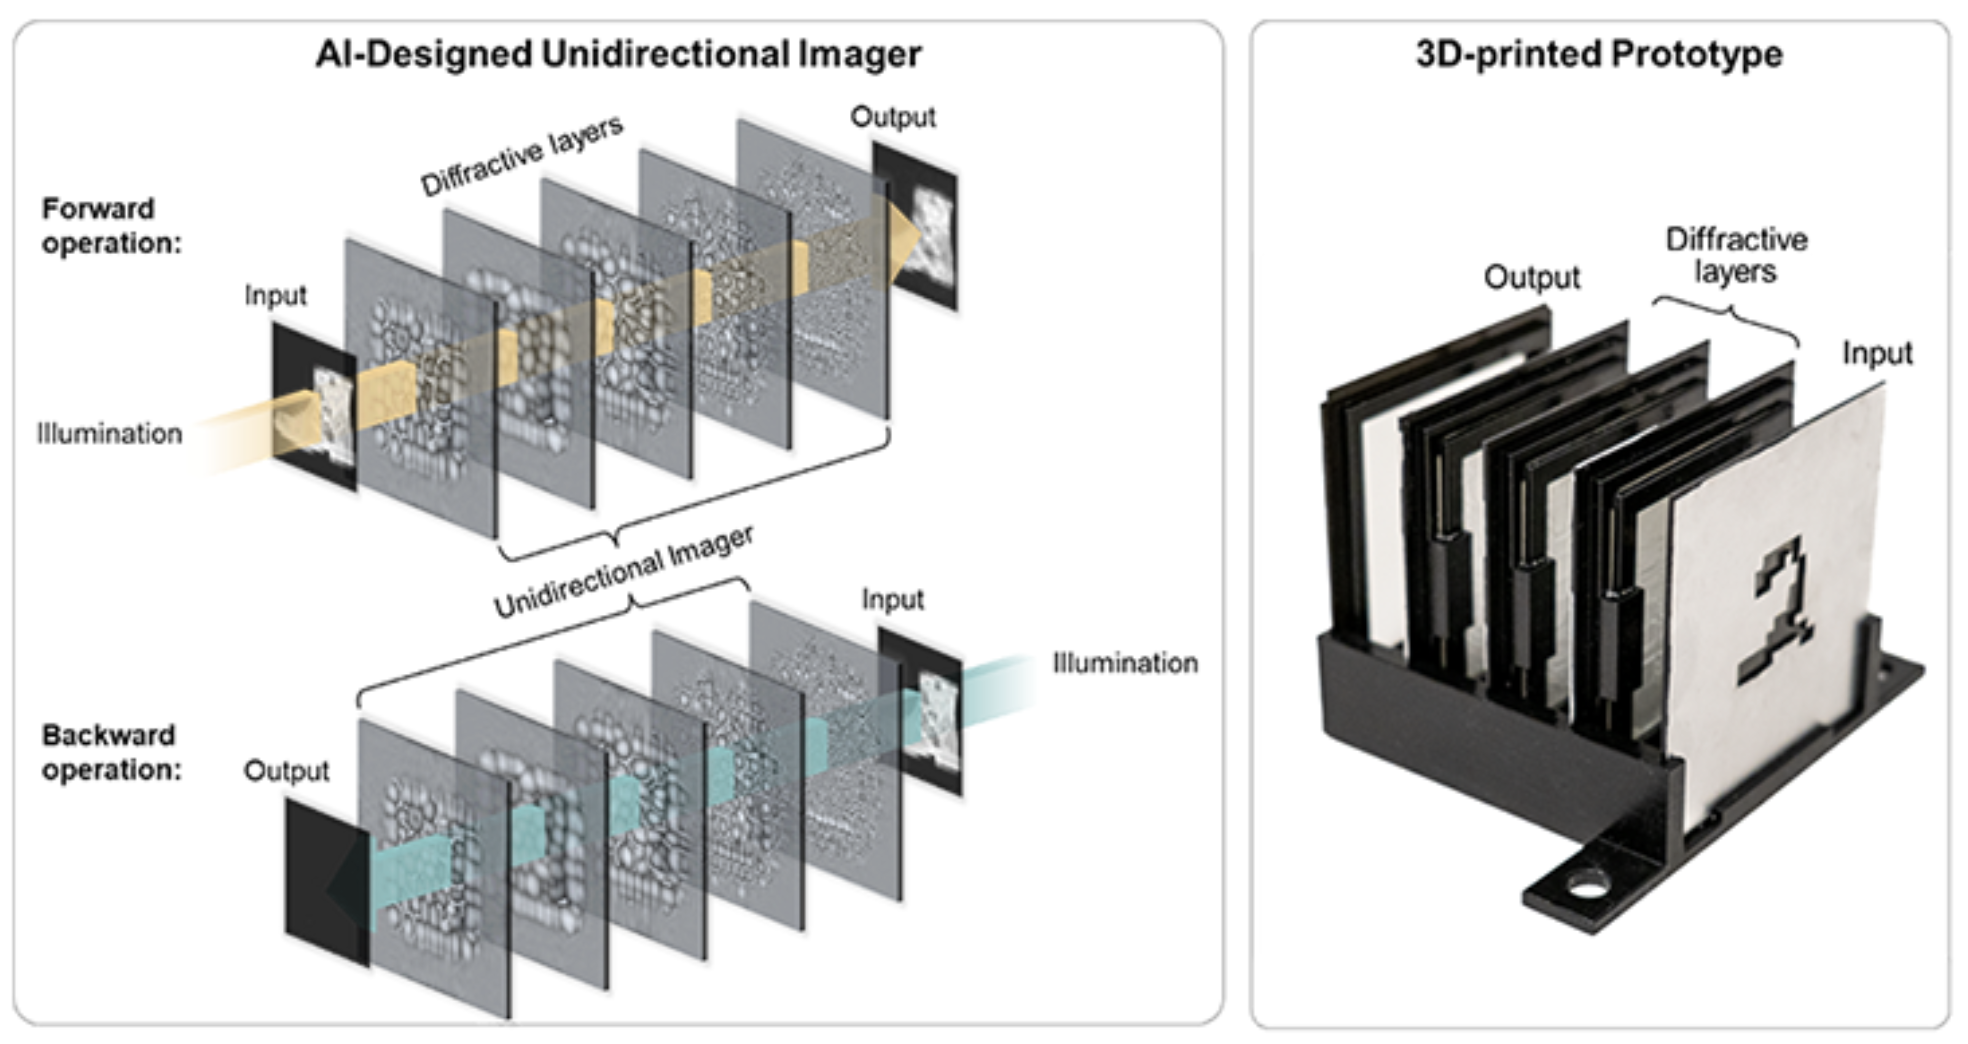 AI-Trained Unidirectional Imagers